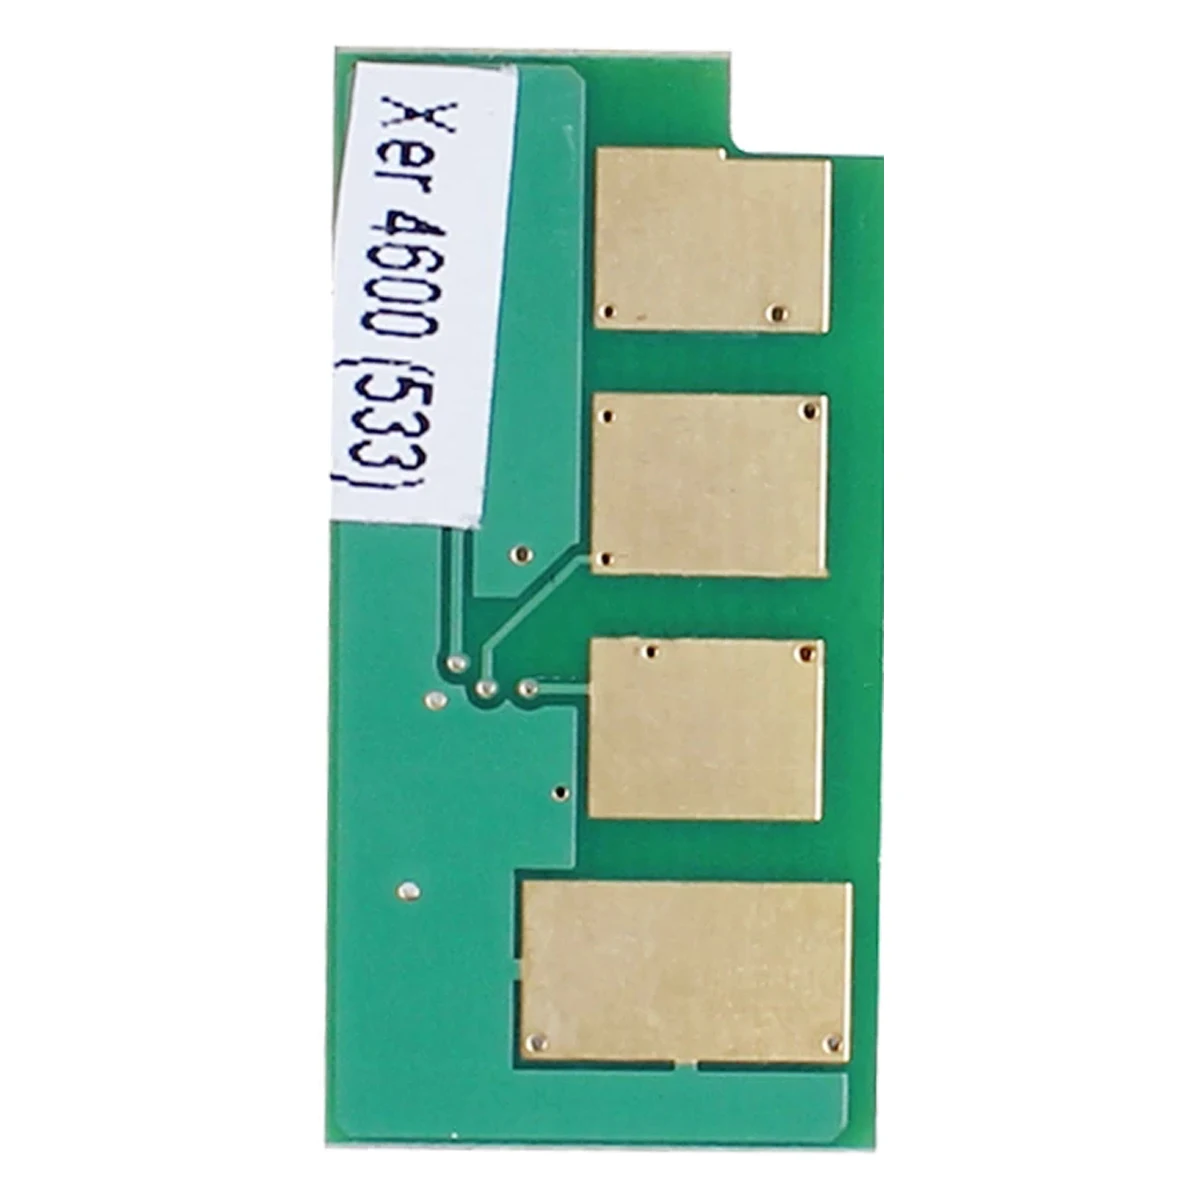 

Toner Chip Refill for Fuji Xerox Phaser 4600 4600DN 4600DT 4600N 4620 4620DN 4620DT 4620N 4622 4622DN 4622DT 106R01533 106R1533